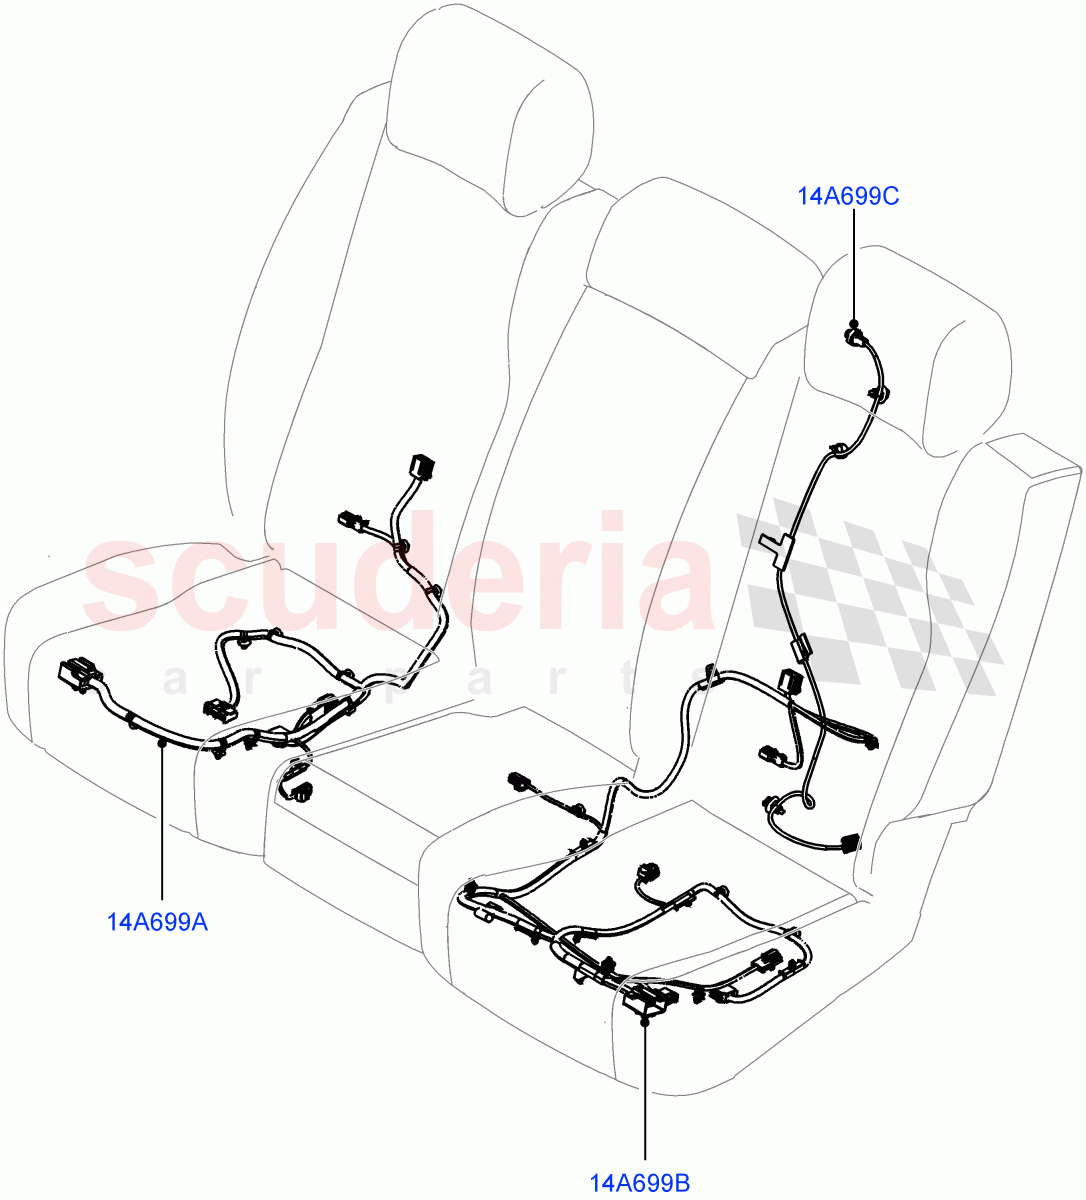 Wiring - Seats(Rear Seats) of Land Rover Land Rover Defender (2020+) [2.0 Turbo Diesel]